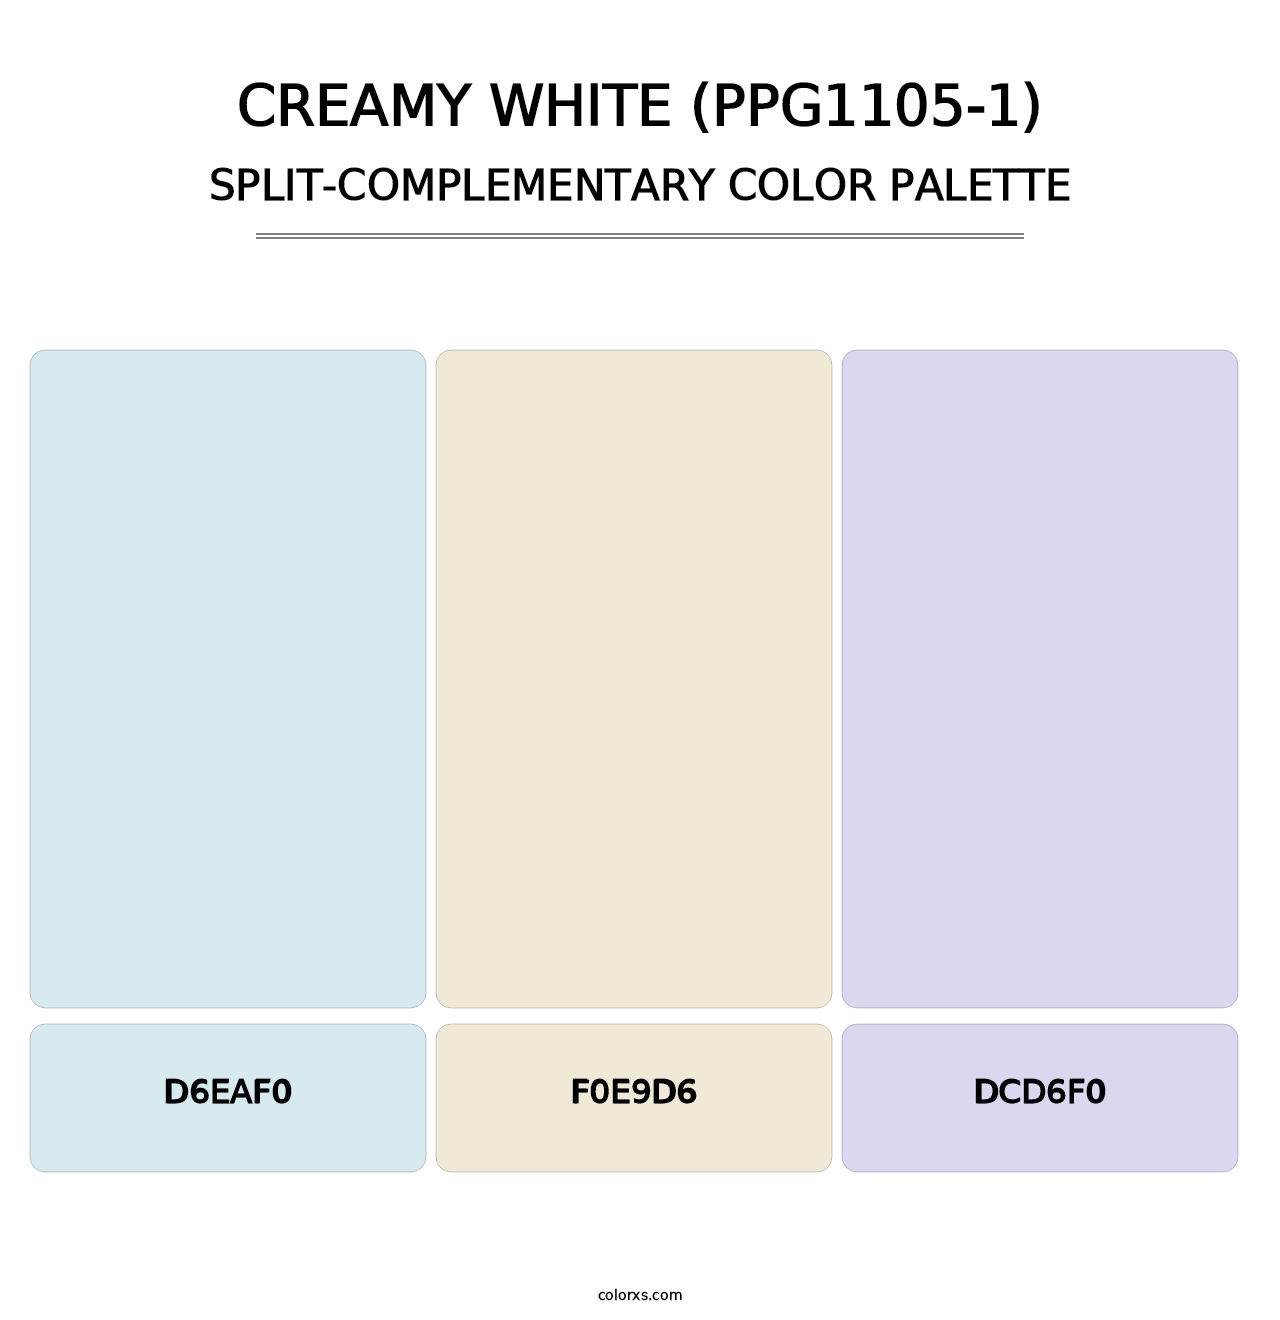 Creamy White (PPG1105-1) - Split-Complementary Color Palette